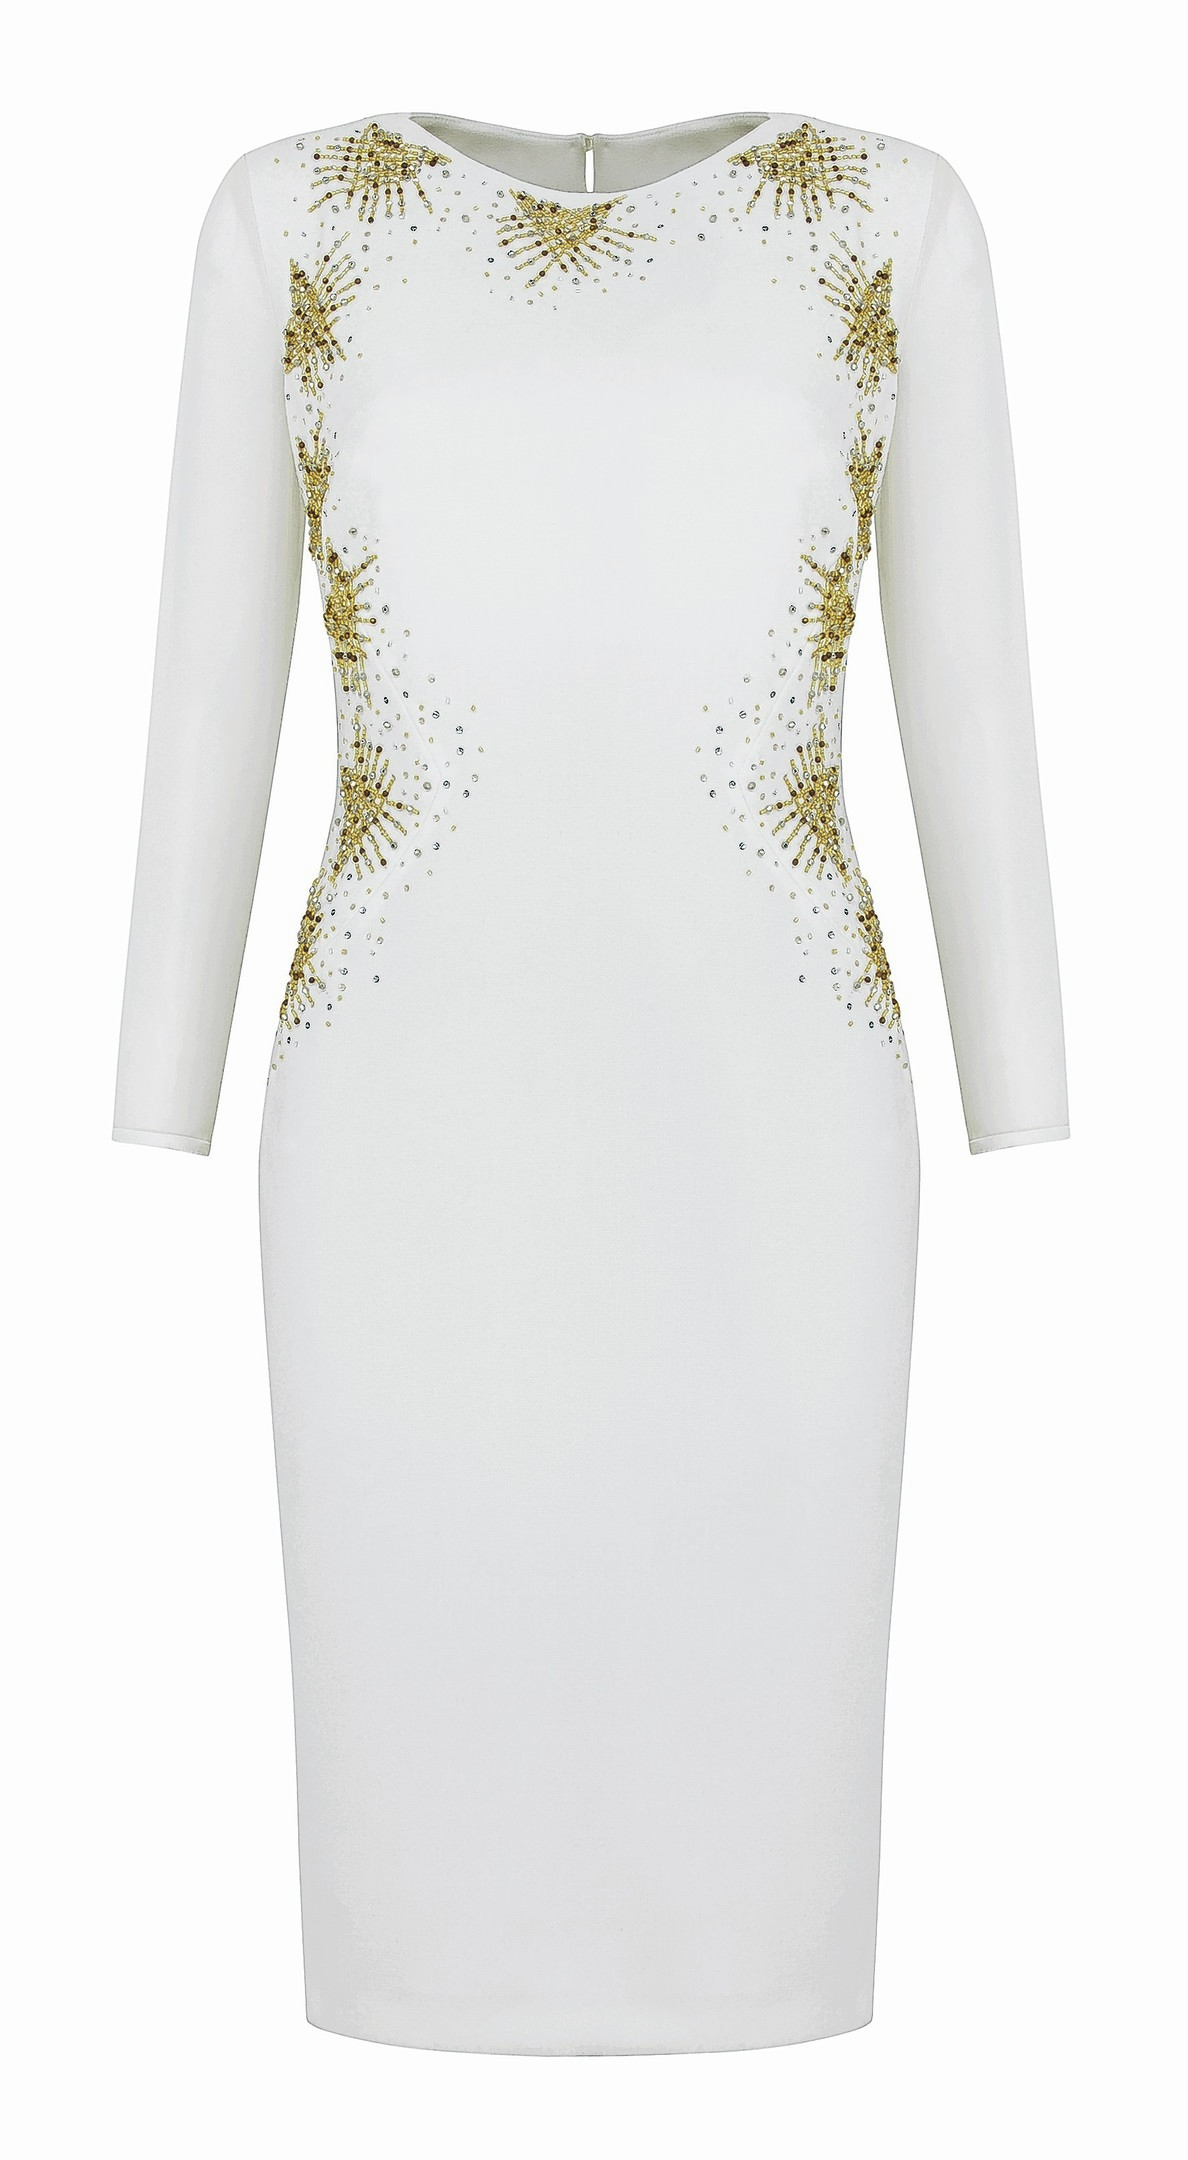 M&S Collection Drop A Dress Size White Dress, £89, available in store (www.marksandspencer.com)